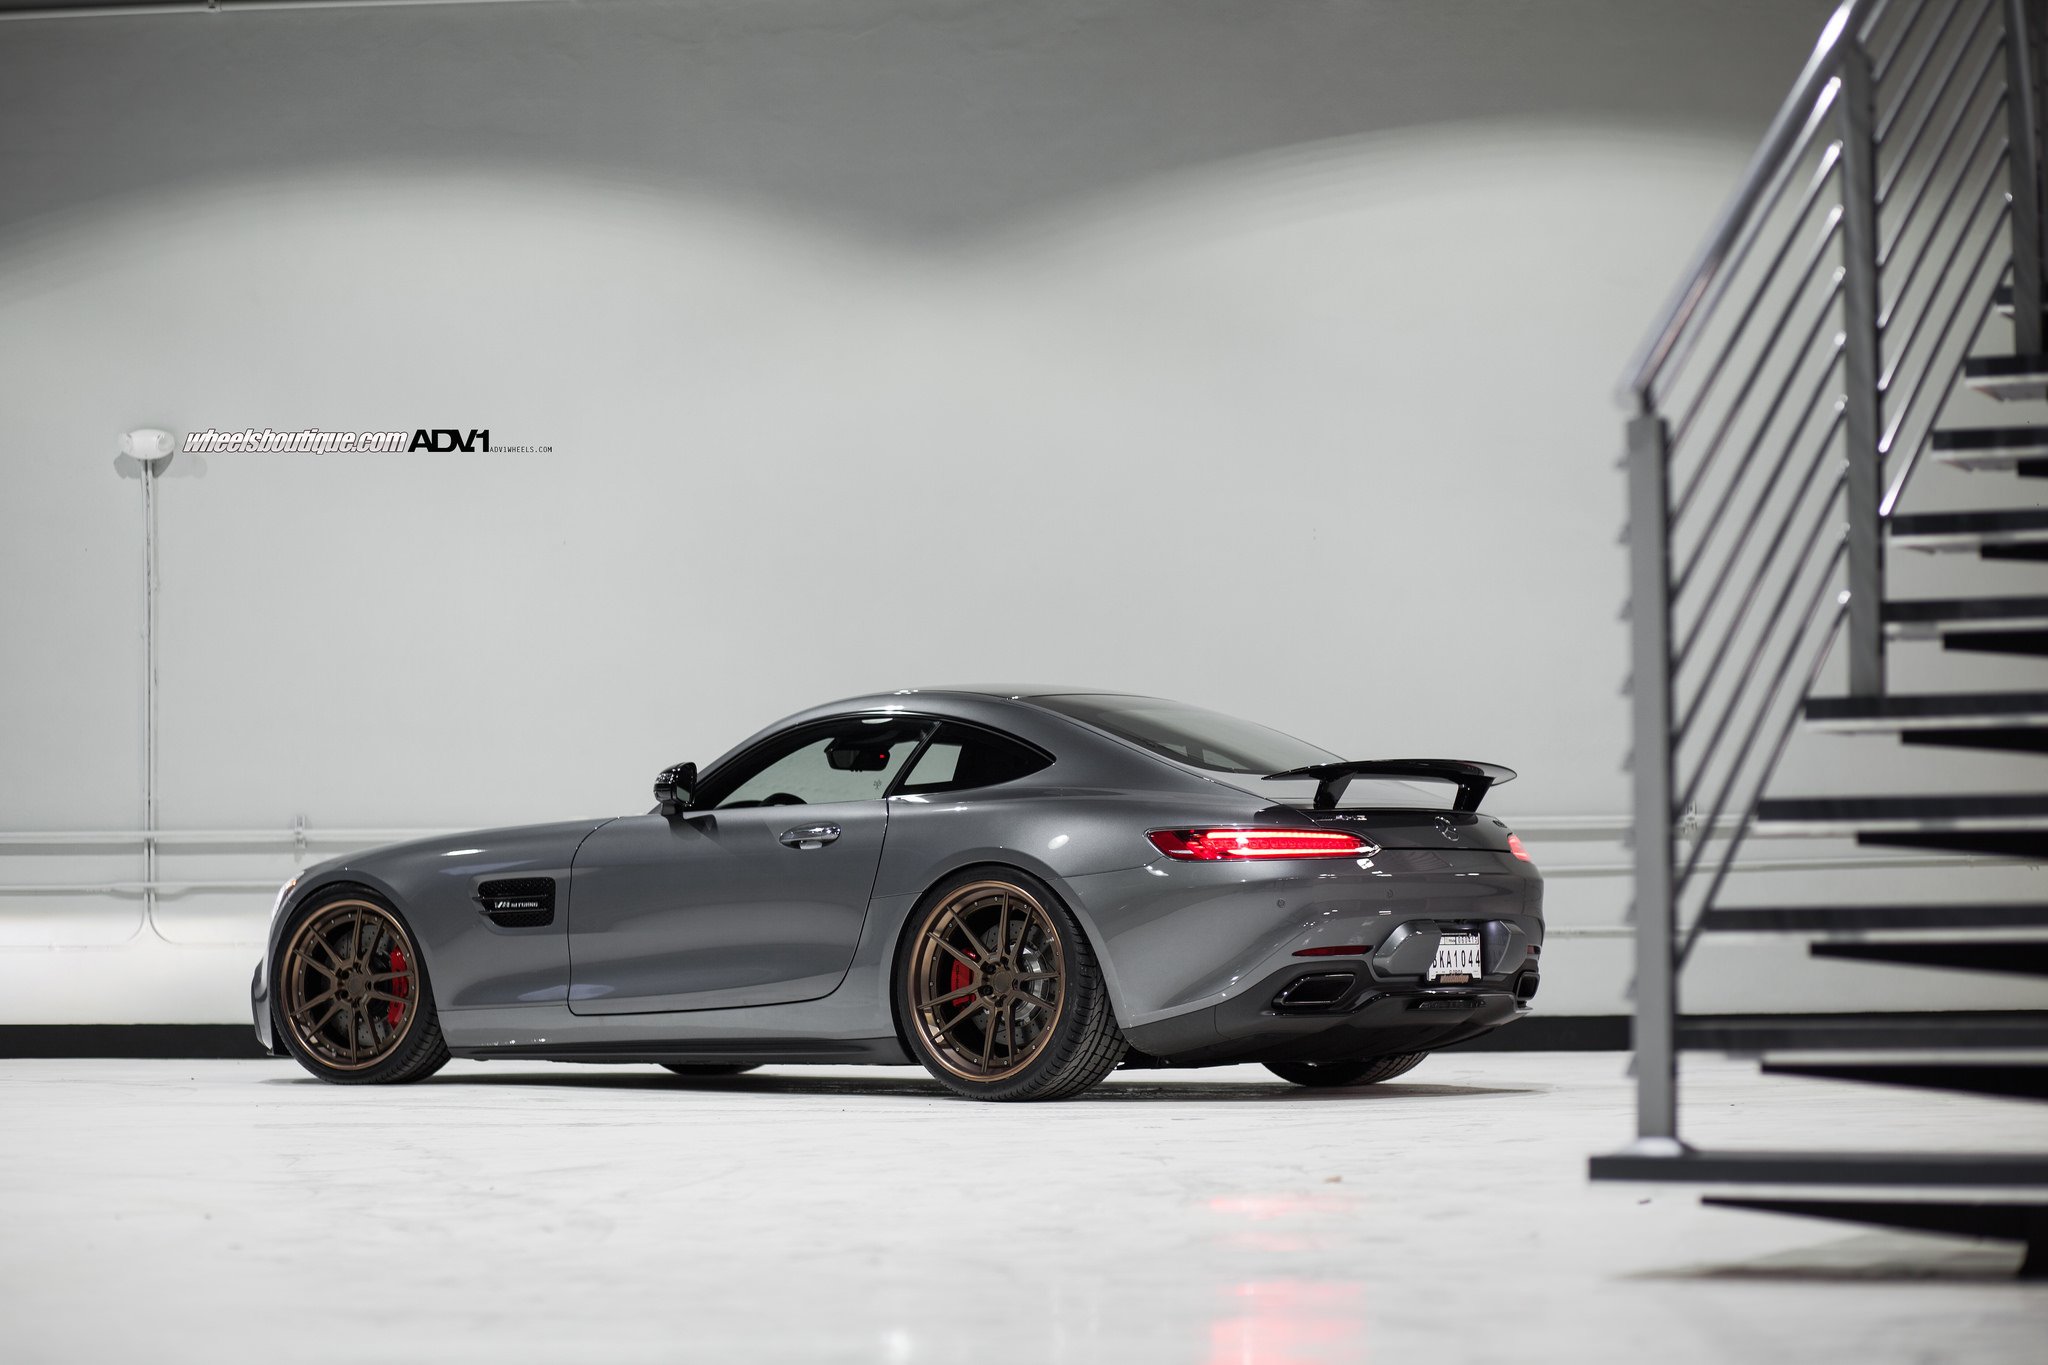 adv, 1, Wheels, Gallery, Mercedes, Amg, Gts, Edition, One, Coupe, Supercars, Cars Wallpaper